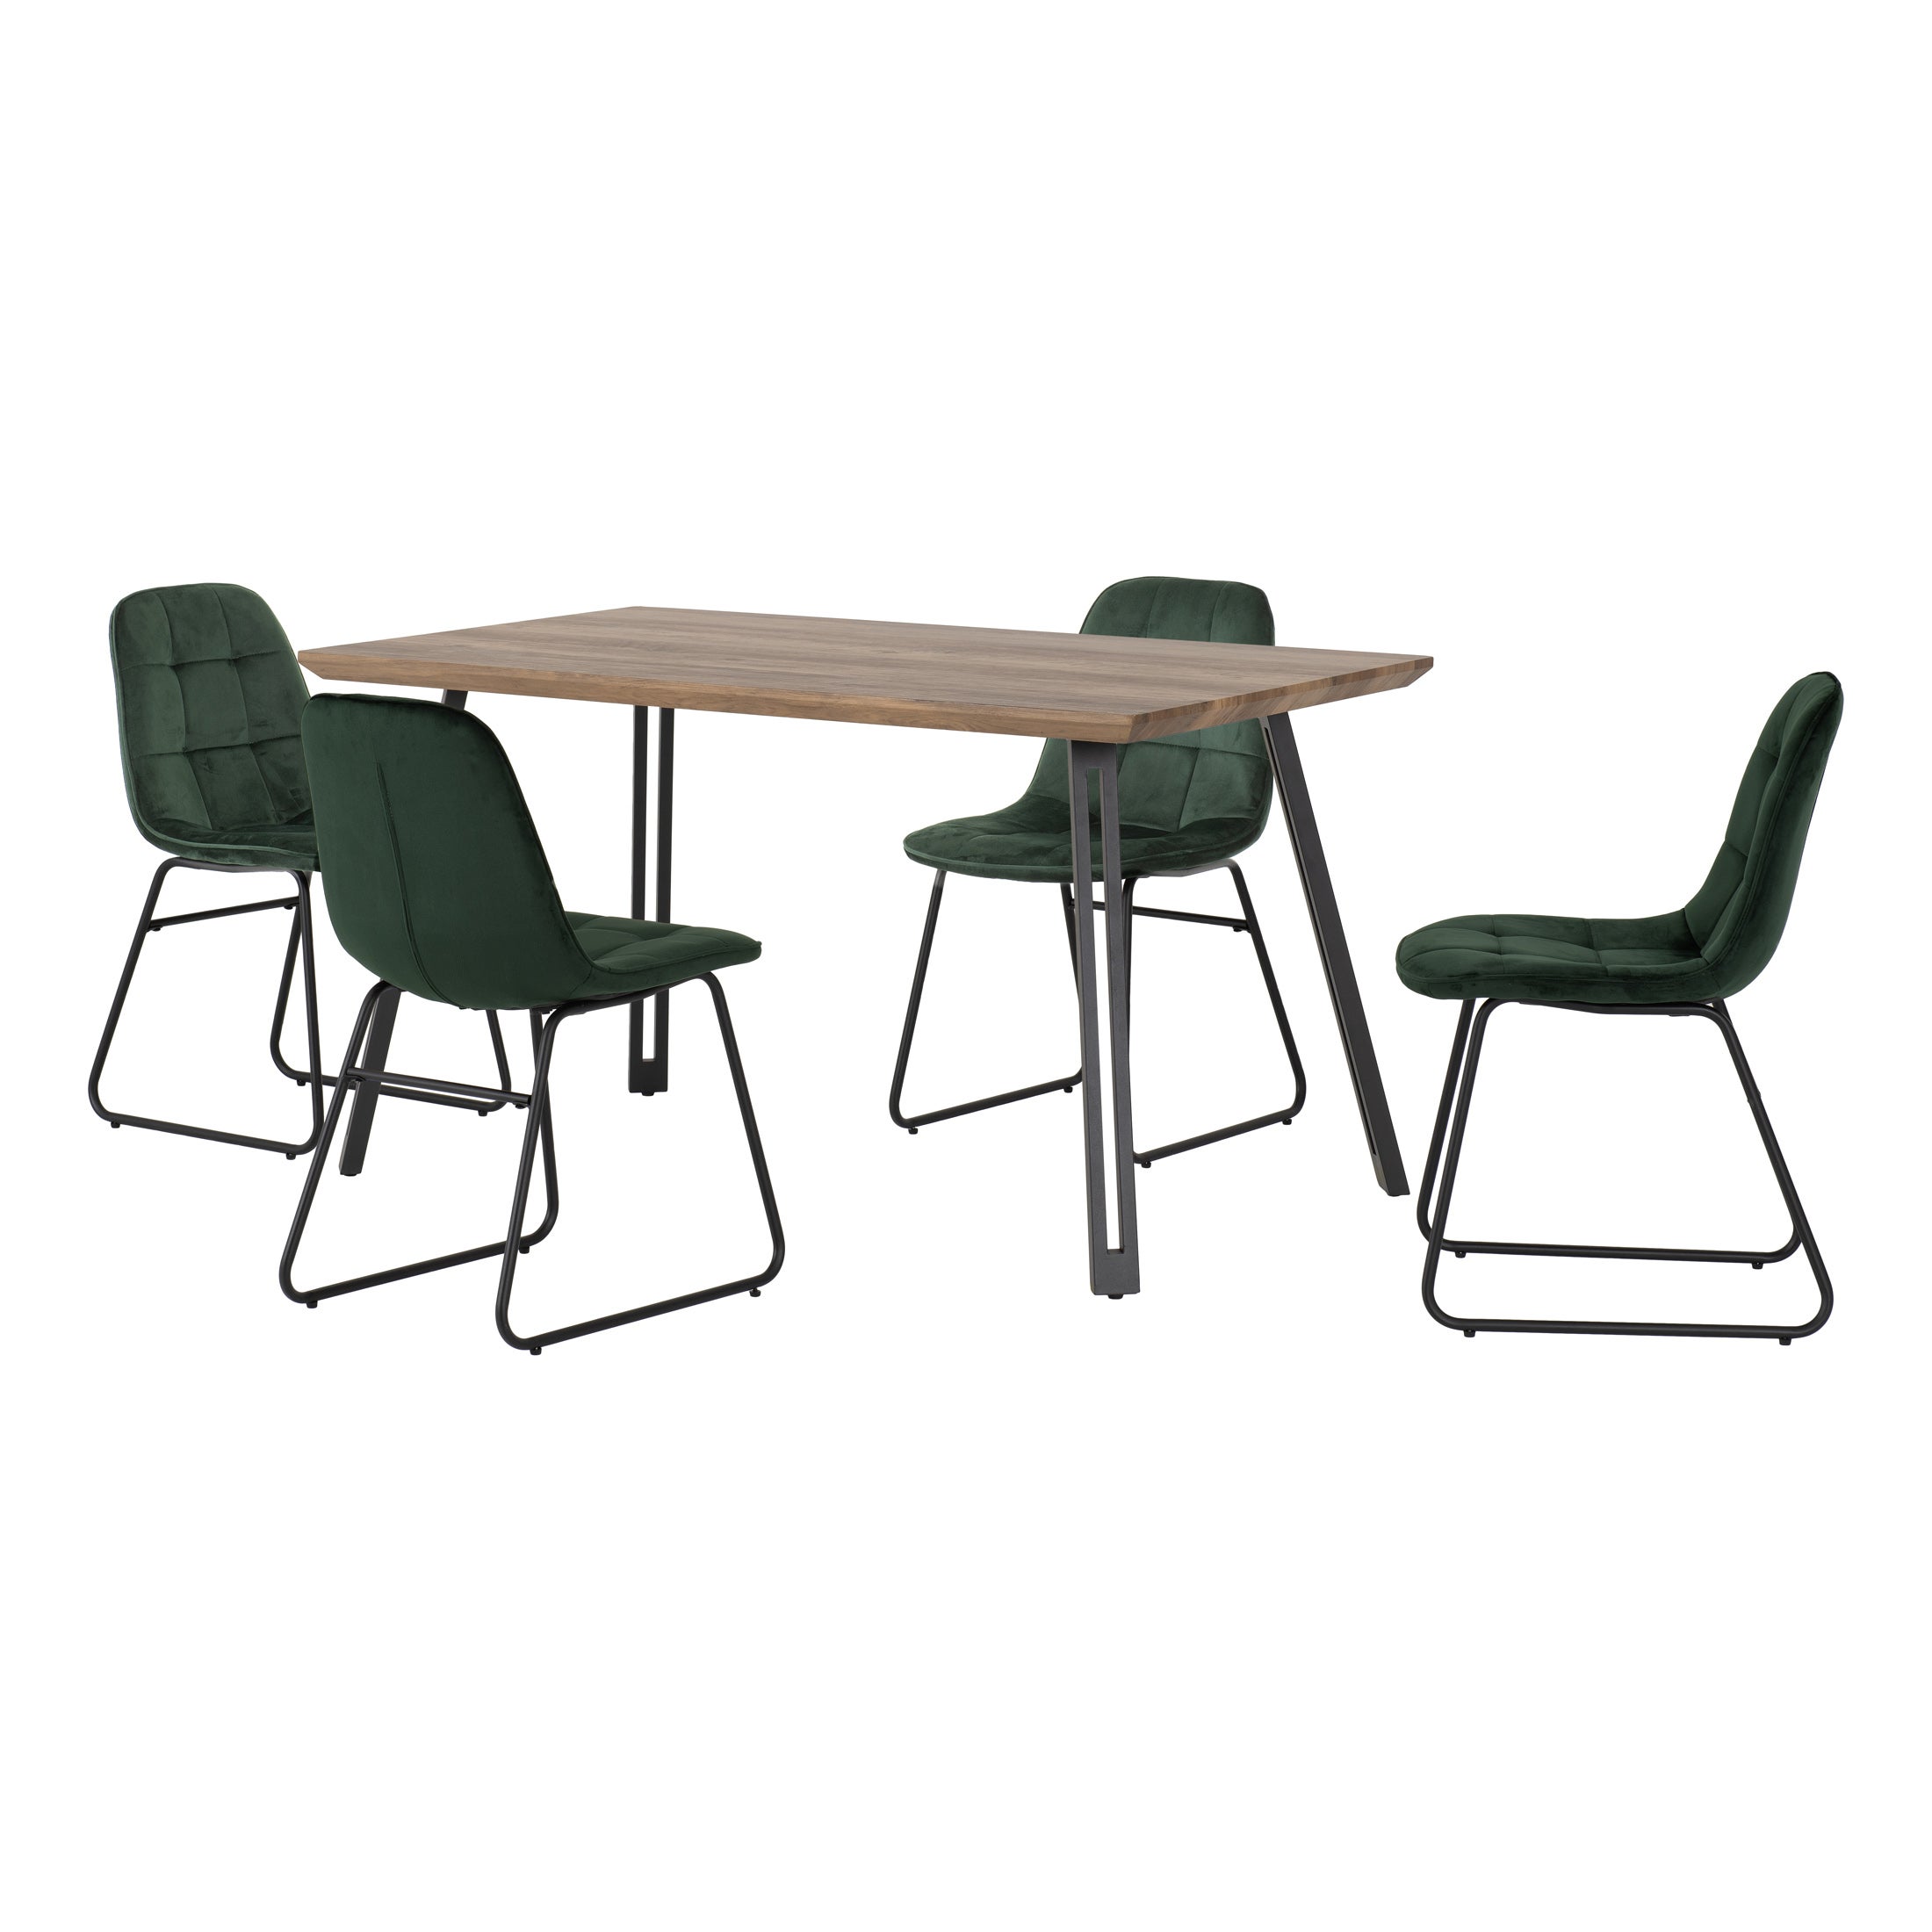 Photos - Sofa Lukas Quebec Rectangular Dining Table with 4  Chairs Green 